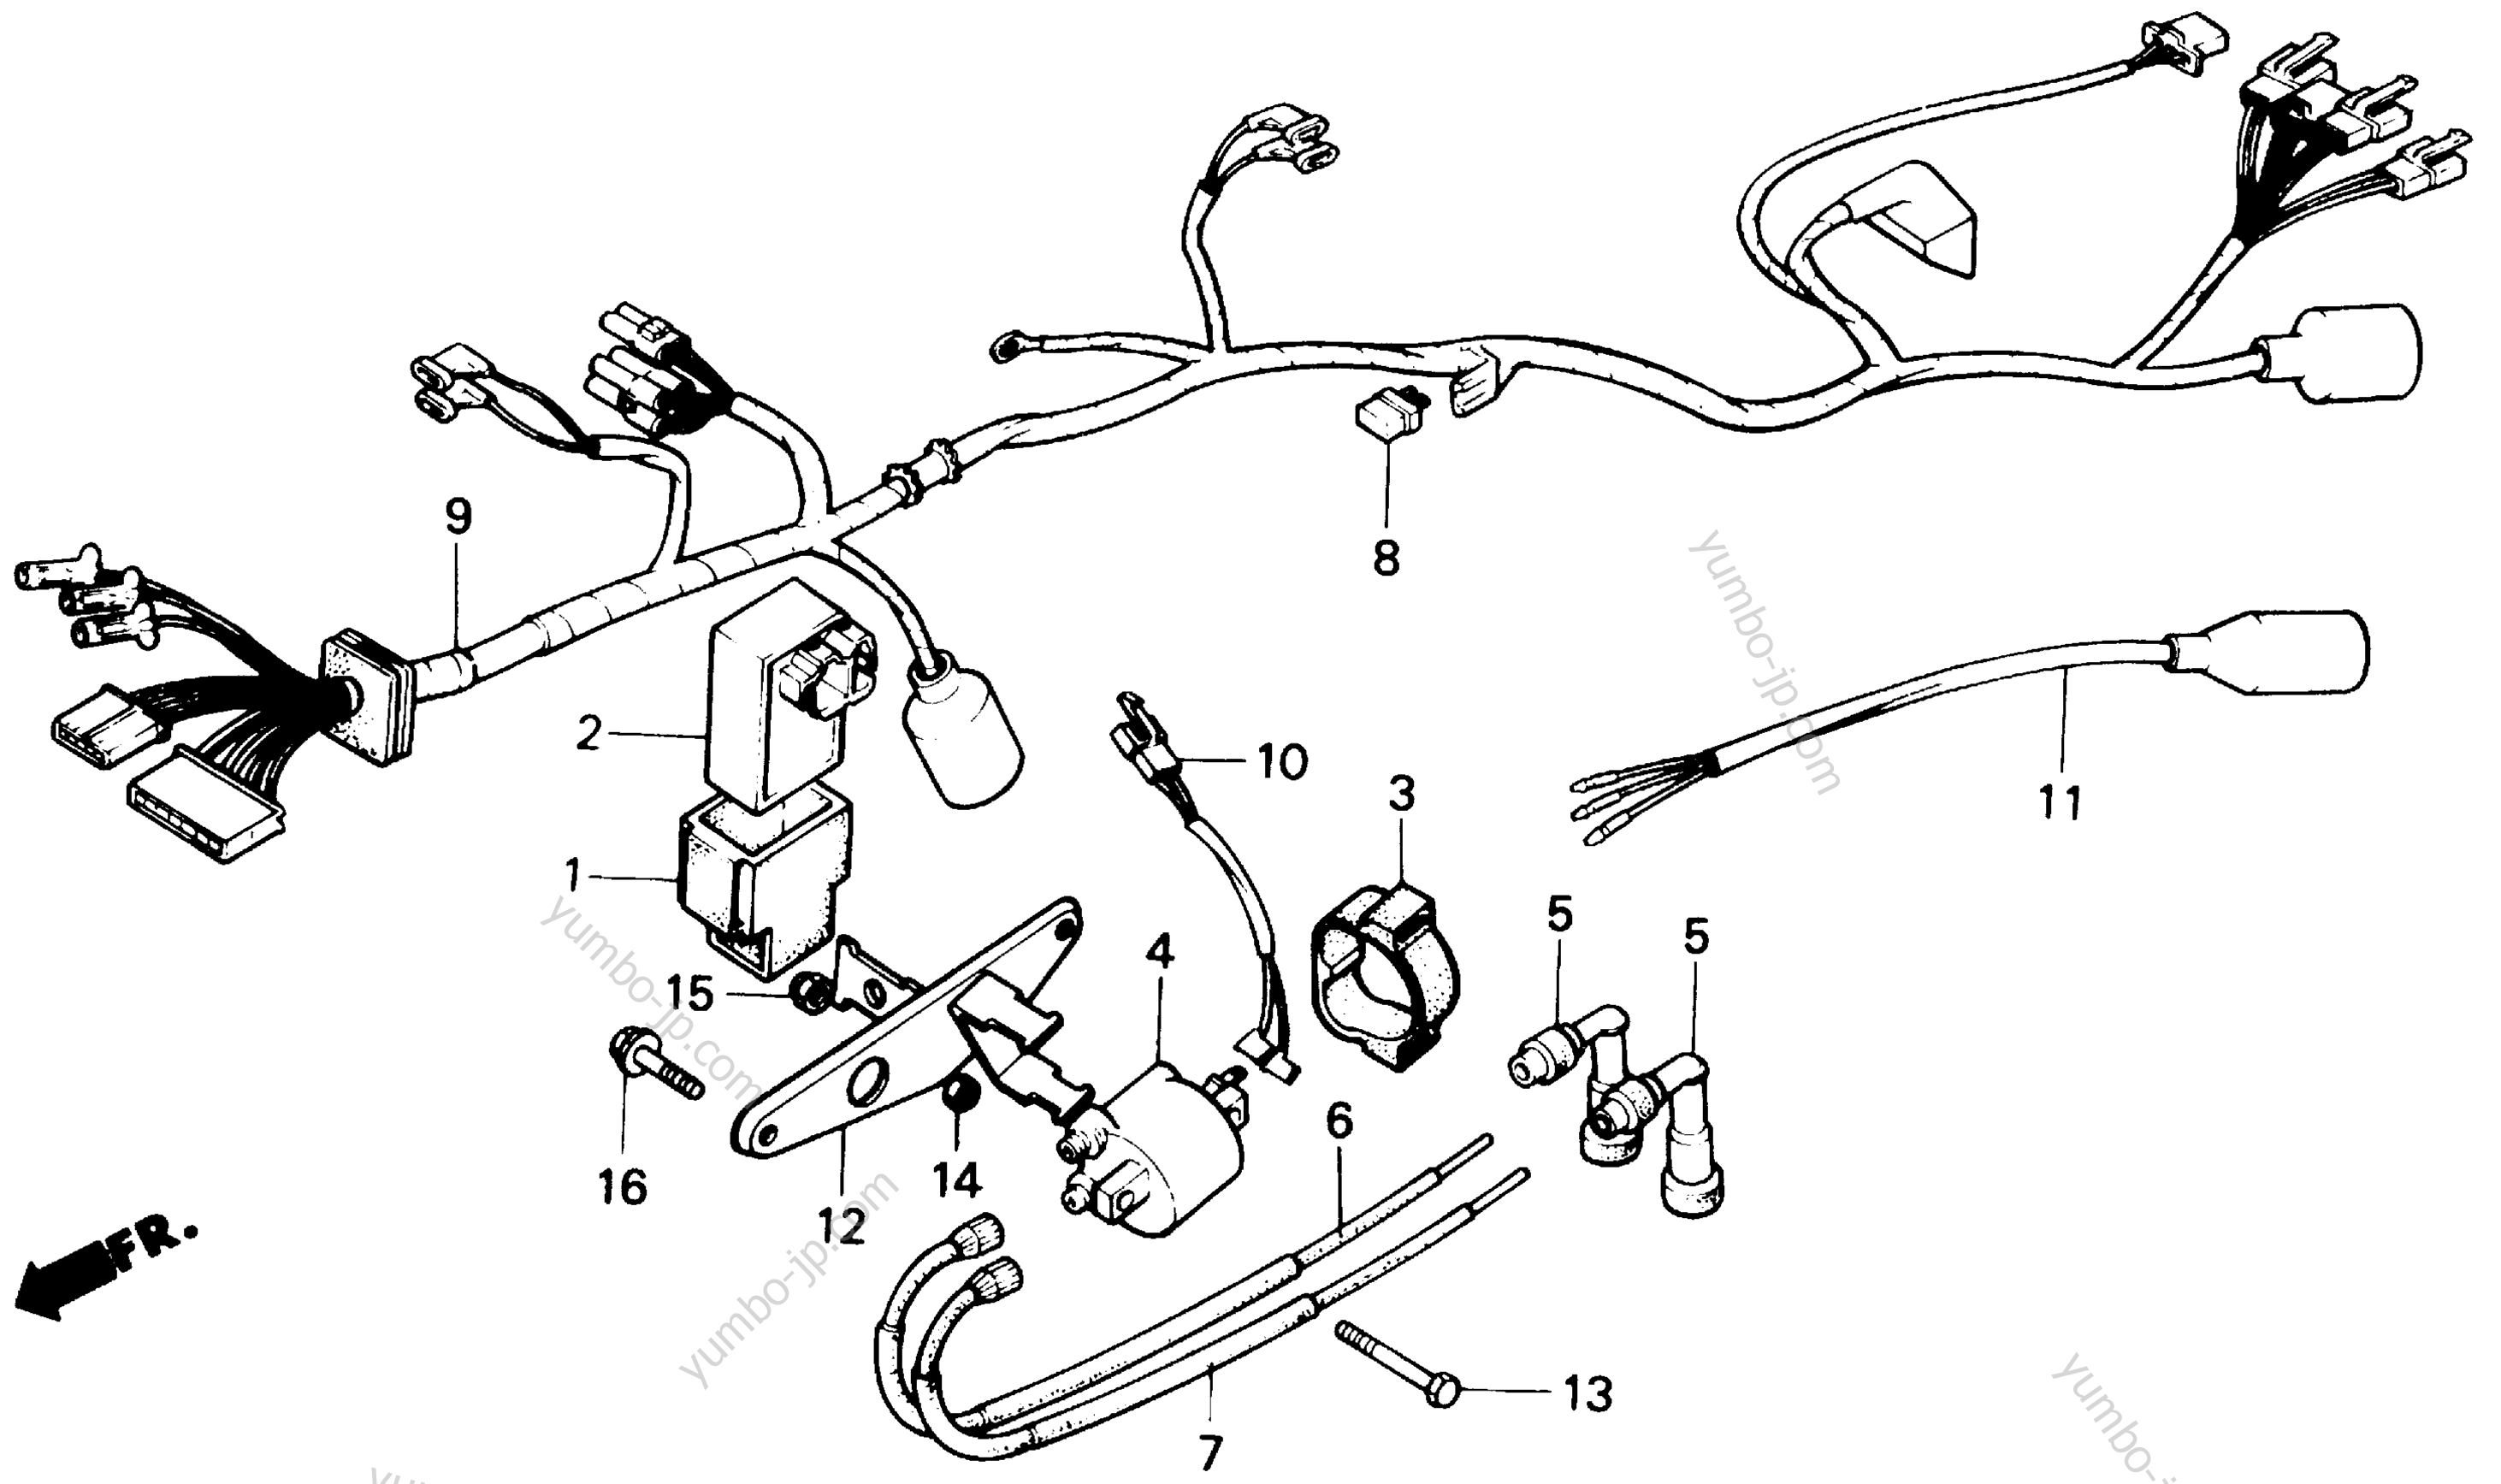 WIRE HARNESS for motorcycles HONDA CMX450C A 1986 year